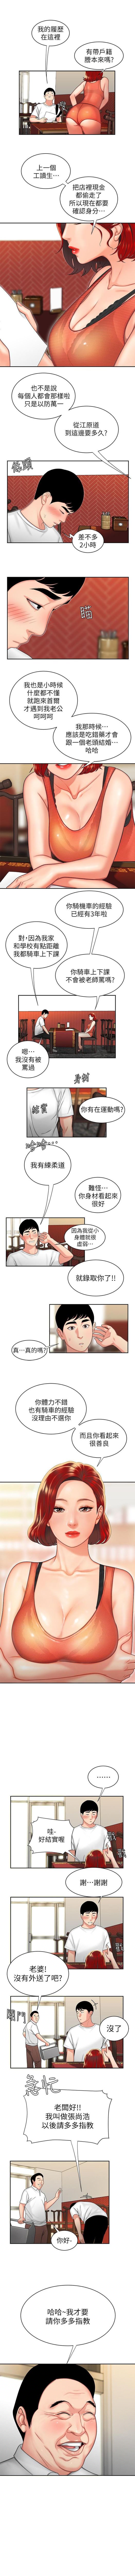 DELIVERY MAN | 幸福外卖员 Ch. 1 [Chinese] 